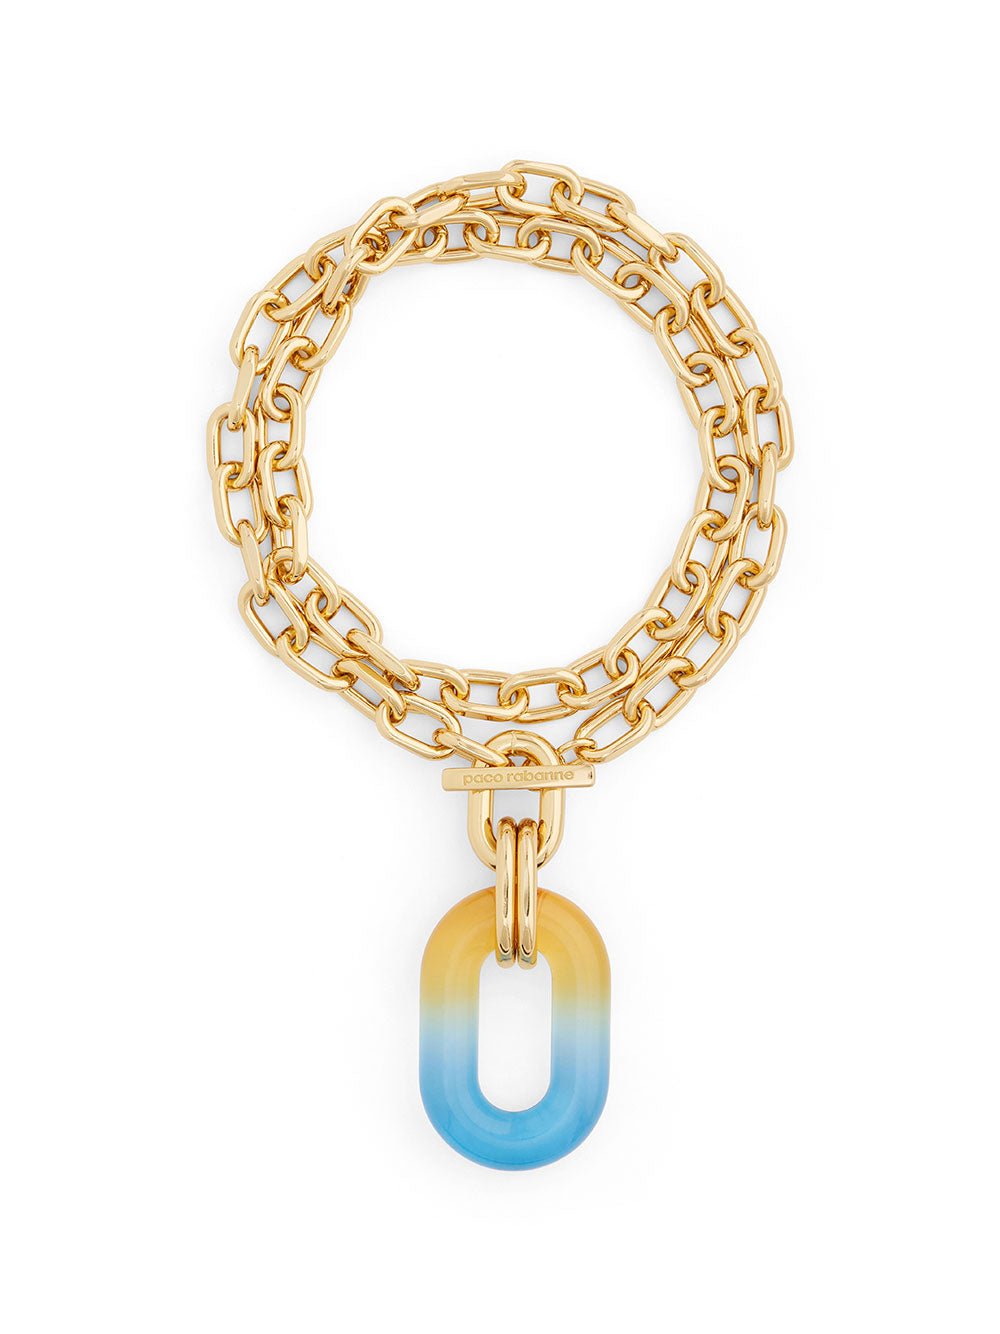 RabanneXL Link necklace at Fashion Clinic